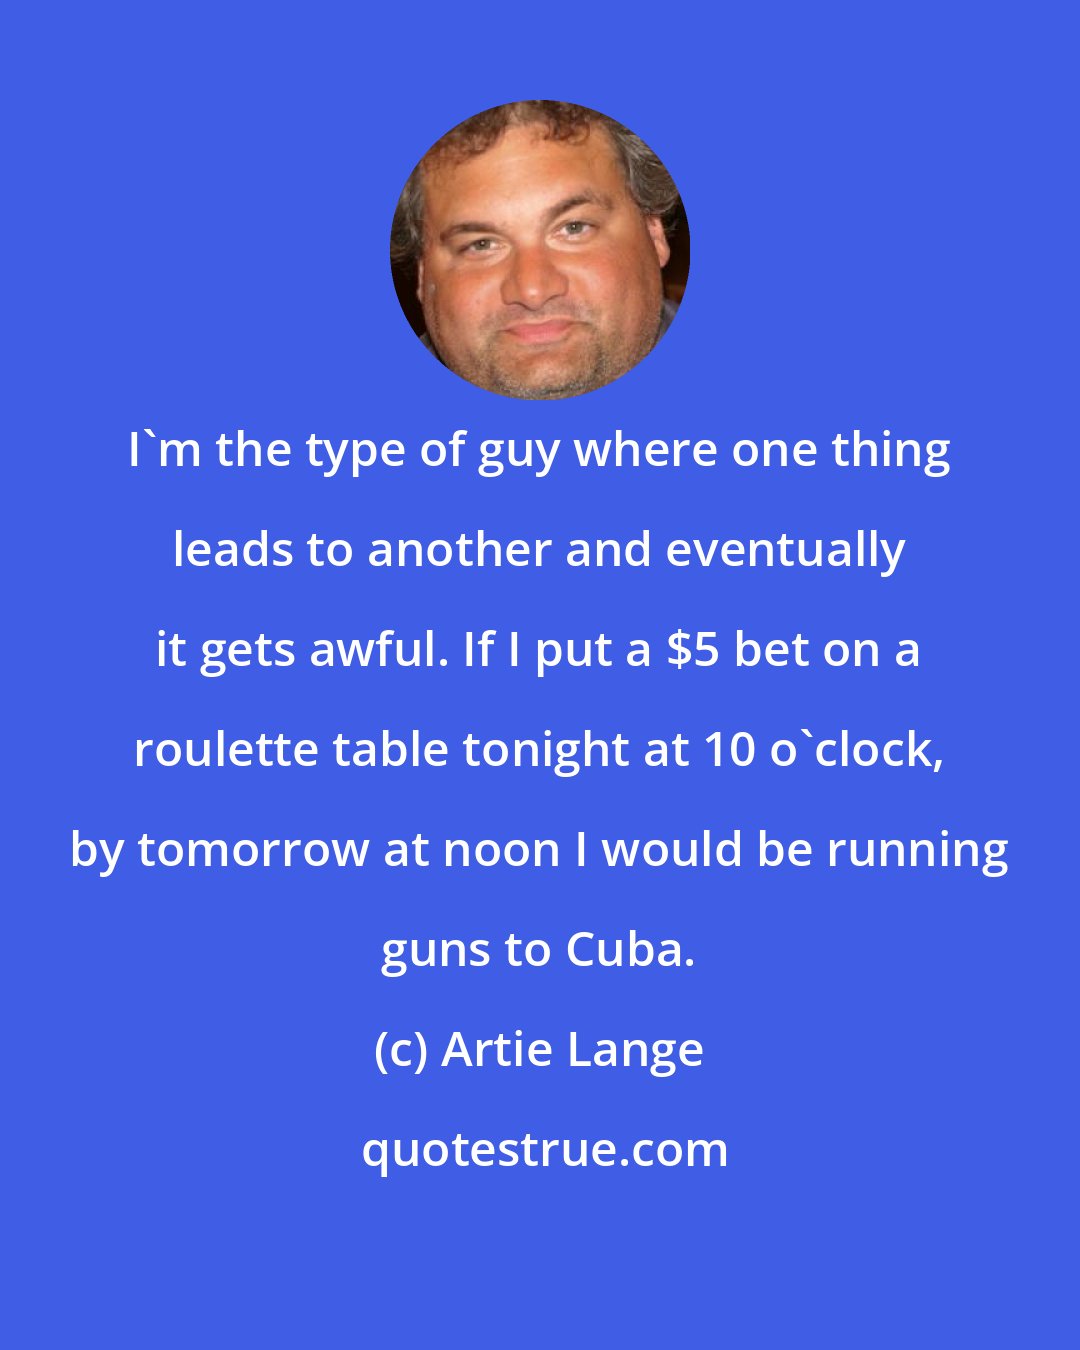 Artie Lange: I'm the type of guy where one thing leads to another and eventually it gets awful. If I put a $5 bet on a roulette table tonight at 10 o'clock, by tomorrow at noon I would be running guns to Cuba.